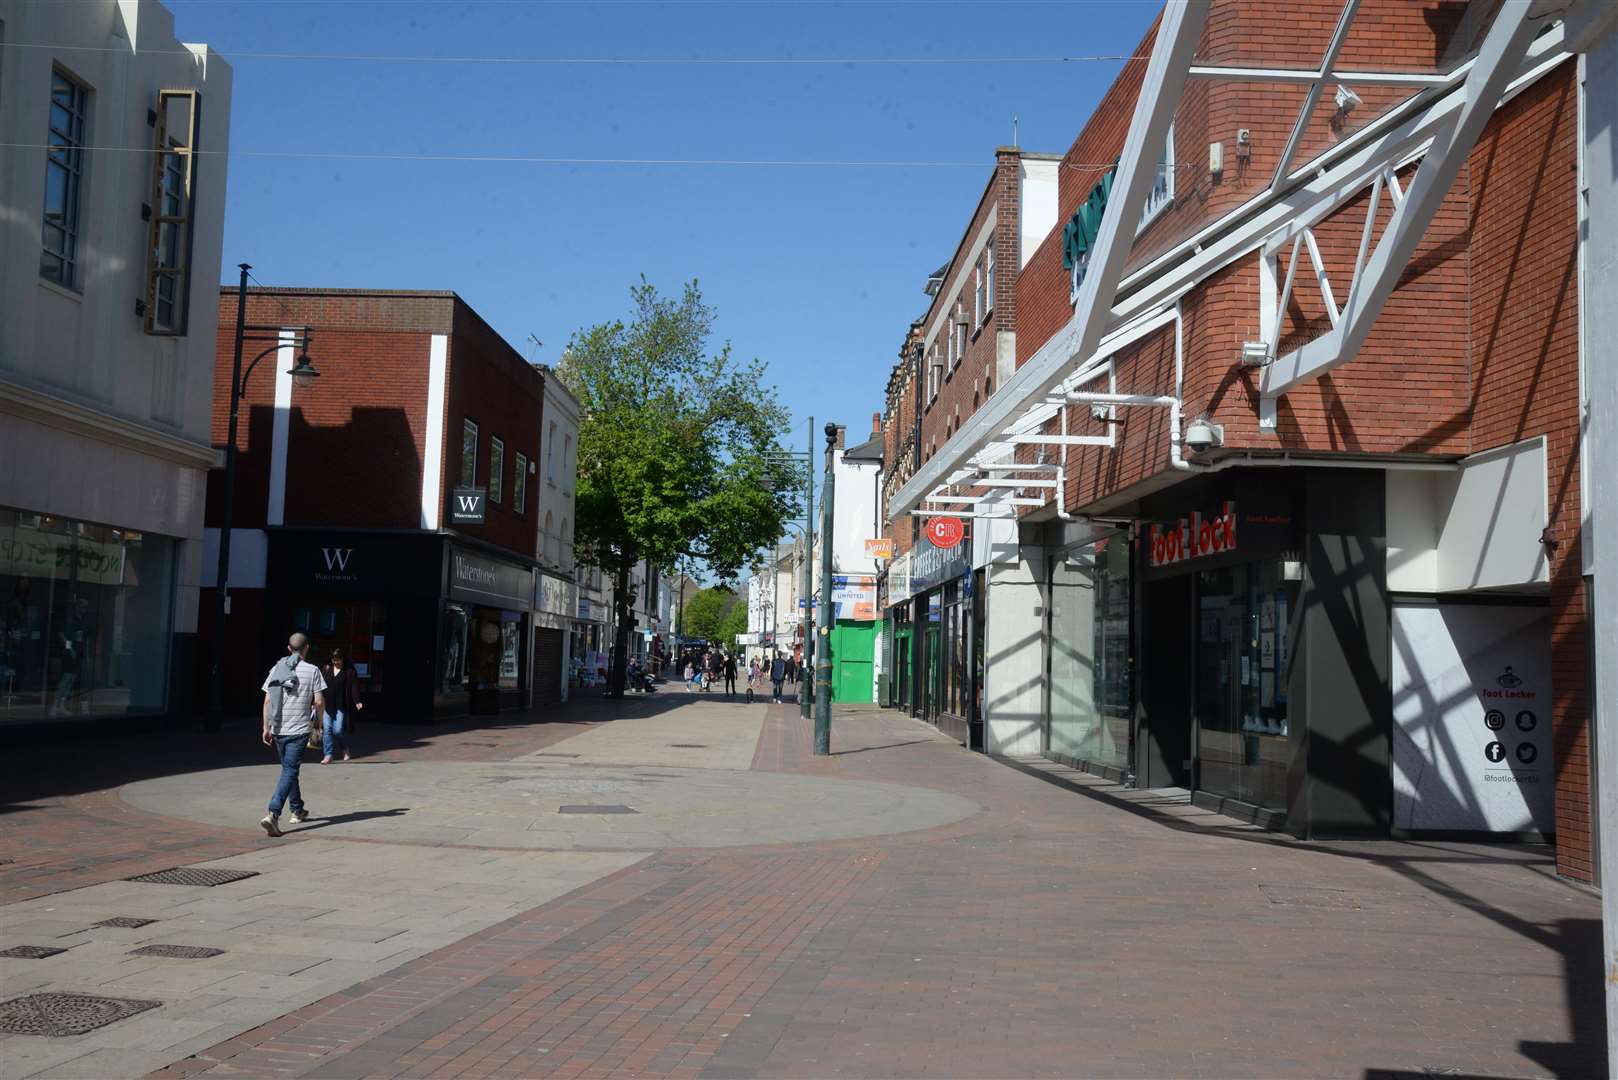 Chatham town centre has been allocated £9.5 million to overhaul and regenerate the High Street